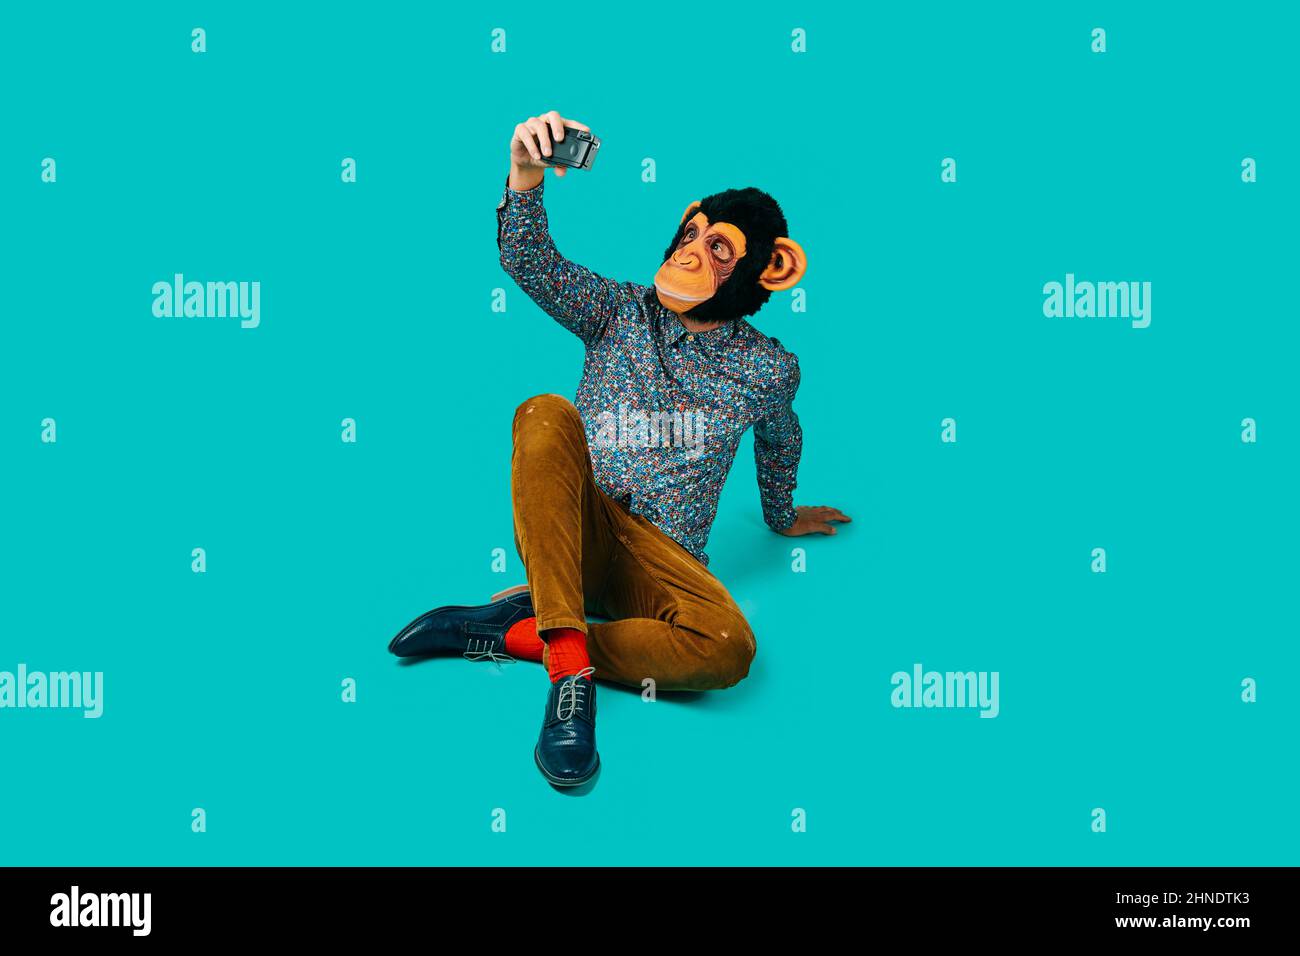 man, wearing a monkey mask and colorful clothes, taking a selfie with a retro film camera, sitting on a blue background with some blank space around h Stock Photo